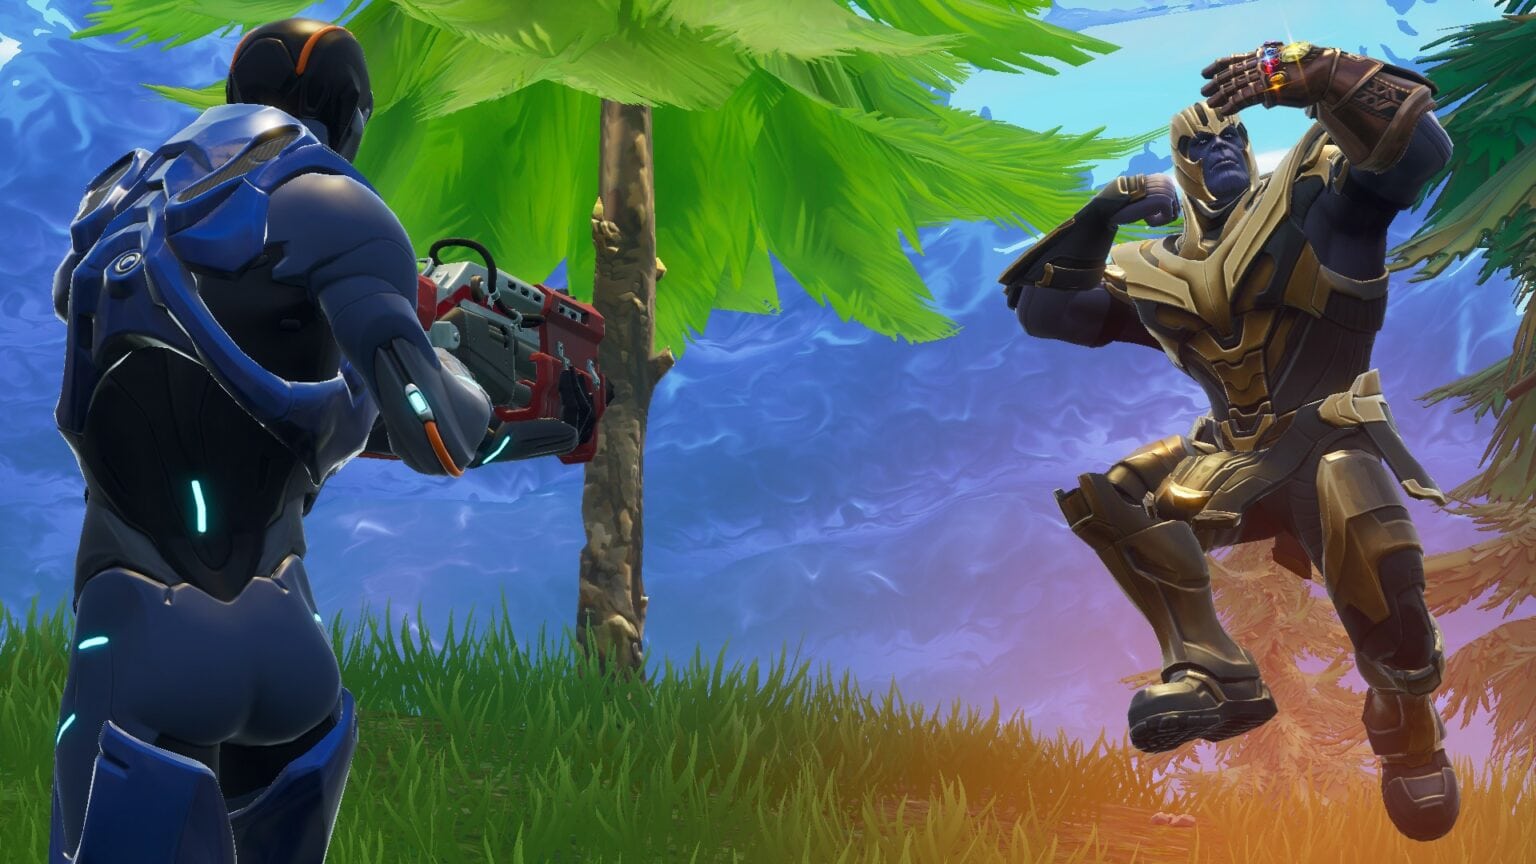 In the legal battle between Apple and Epic Games, which one is Thanos?